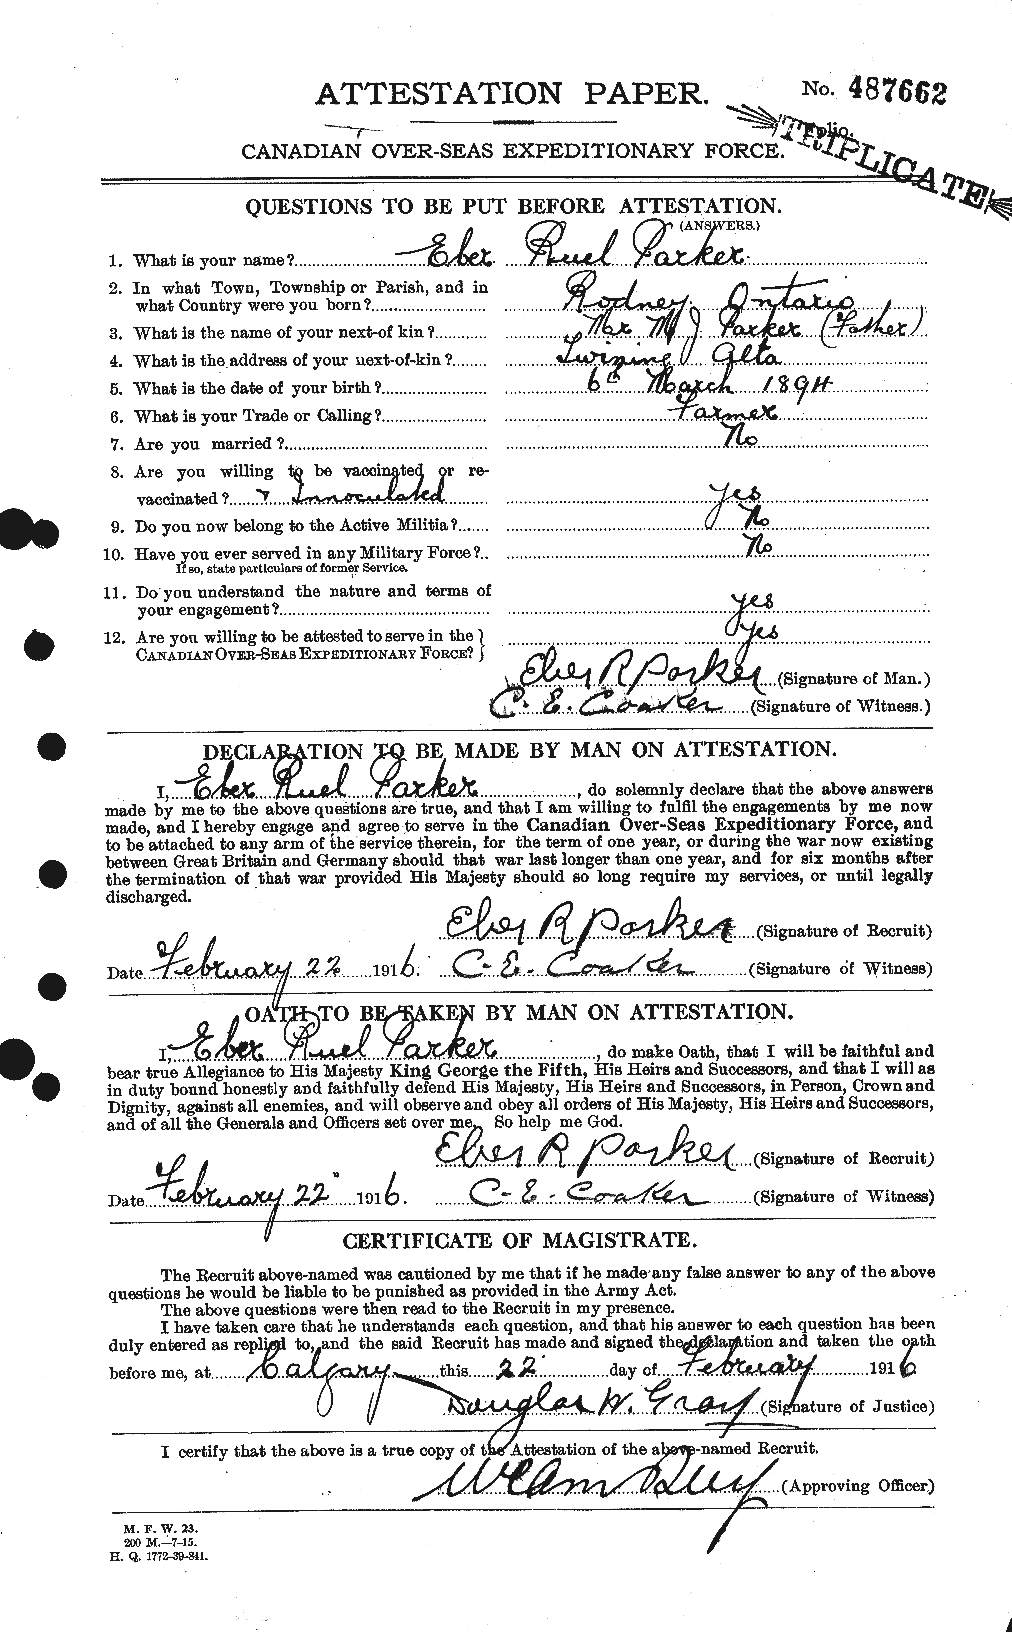 Personnel Records of the First World War - CEF 565122a